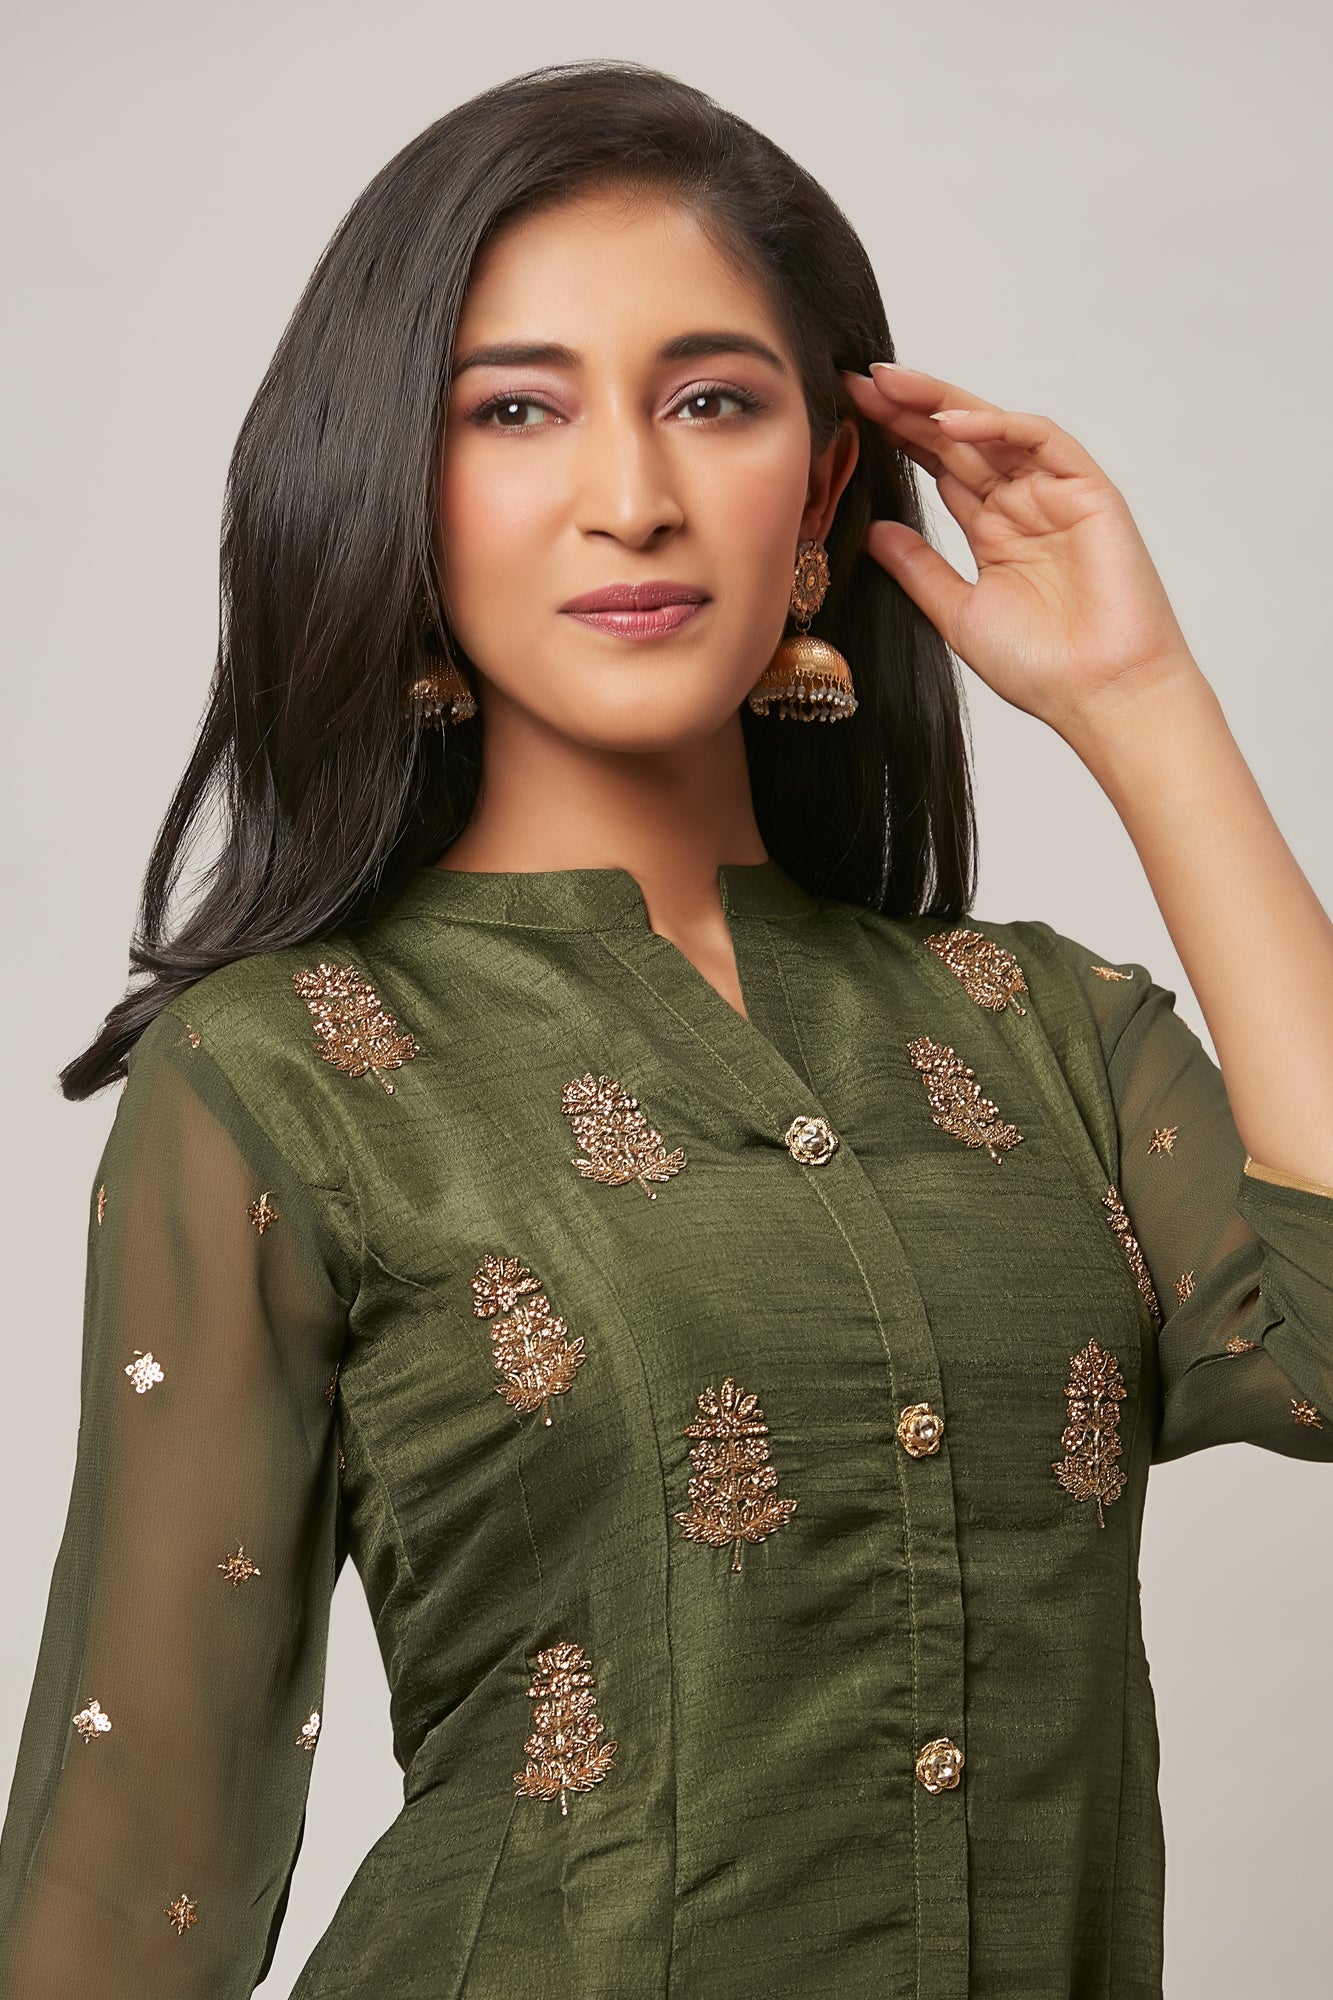 Urban Mystic Olive Green Colored Long Flared Party Wear Kurta